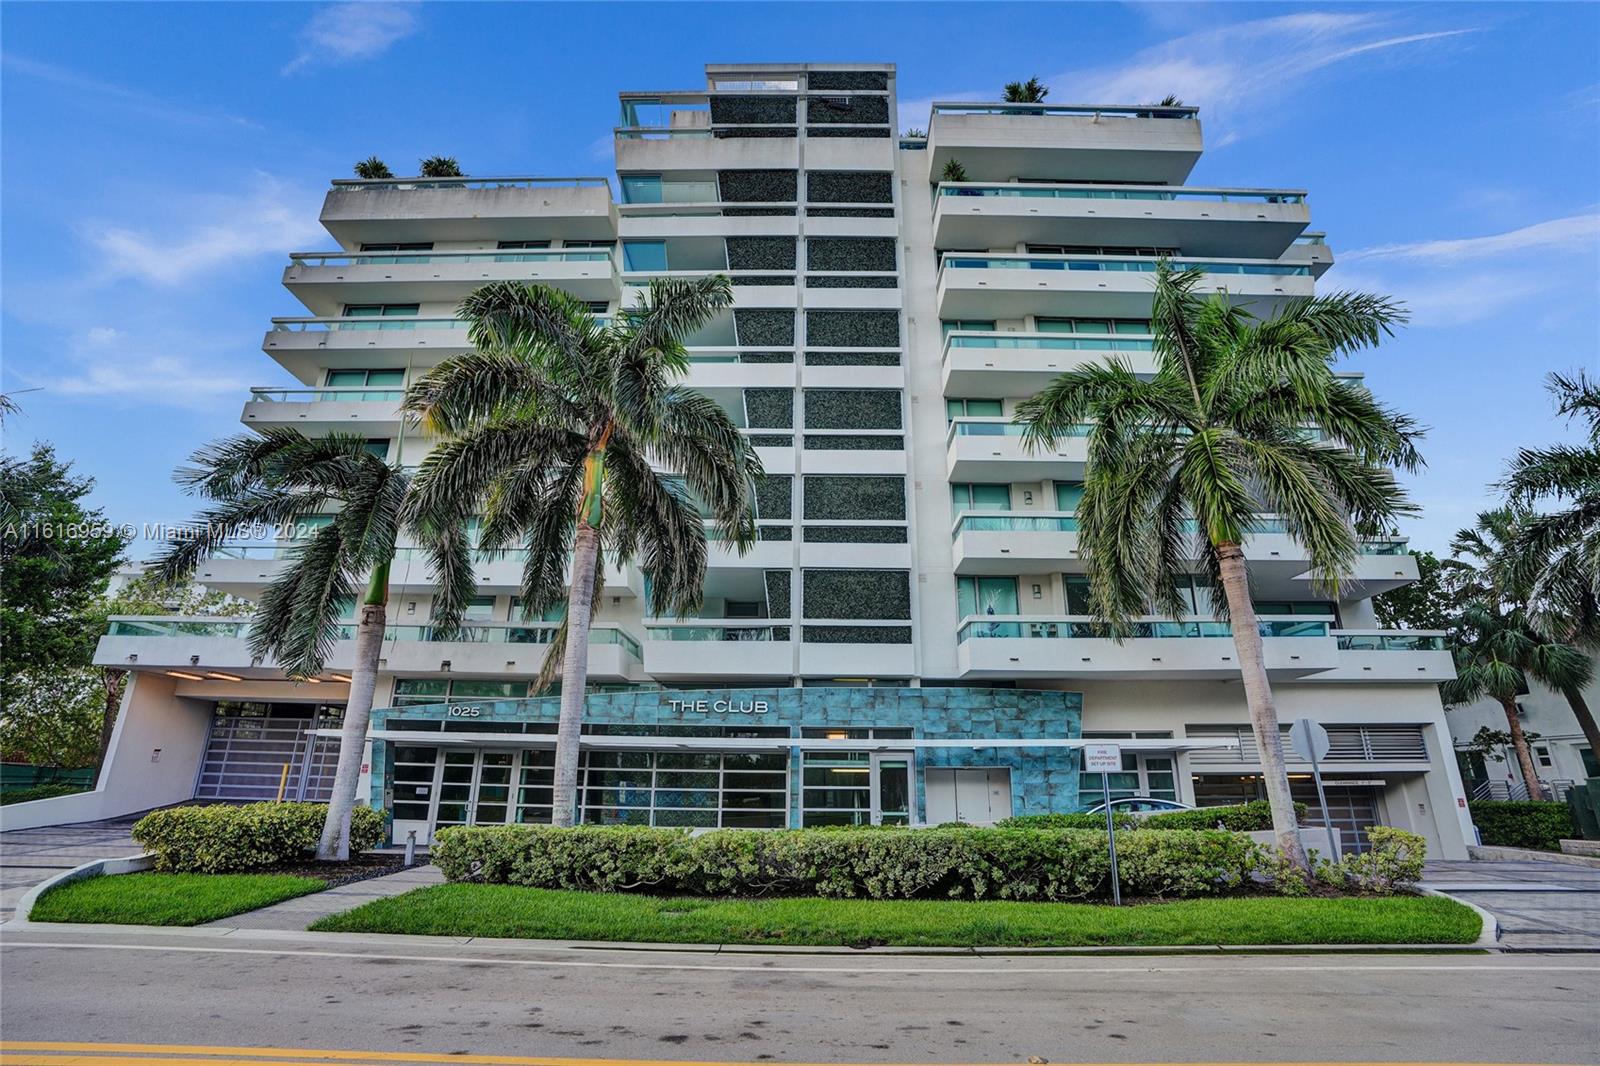 Experience modern luxury living in this elegant 2 bed, 2 bath unit in the heart of Bay Harbor Islands. This light-filled residence boasts floor-to-ceiling windows and sliding doors. The modern open kitchen features top-of-the-line appliances, while the ample balcony space provides a perfect spot to unwind. The residence comes with a storage space and 2 parking spaces, a rare find in the area. The building features a fabulous rooftop deck with an infinity pool, jacuzzi, BBQ/entertainment area and a gym. A Dog's Park is also available across the street. Located just blocks away from the beach, houses of worship, and shopping, this unit is the epitome of modern luxury living.